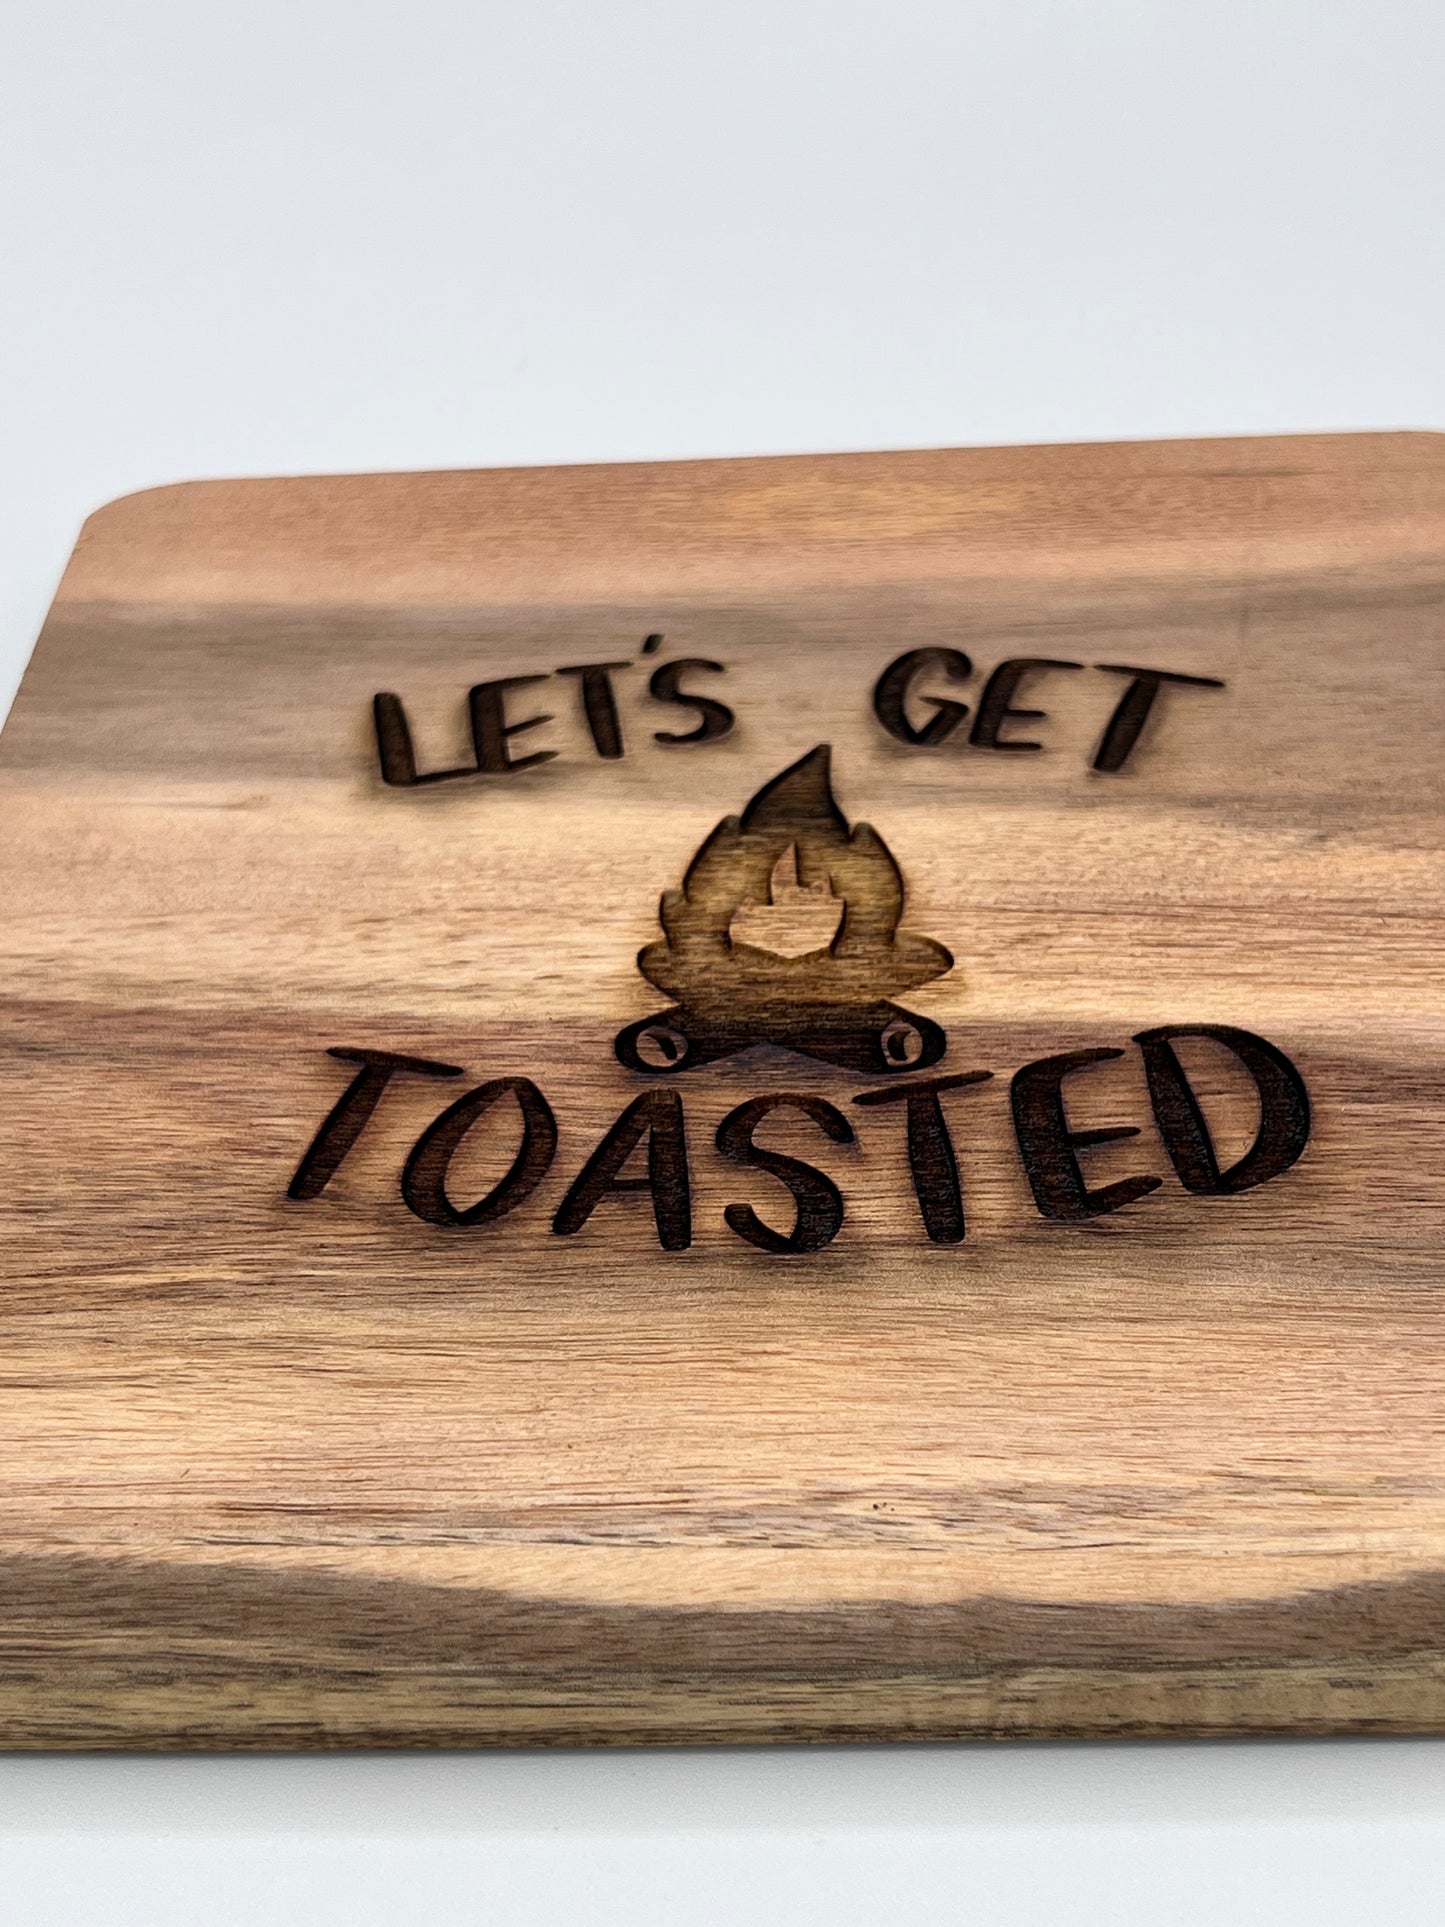 "Let's Get Toasted" Engraved on Acacia Wood